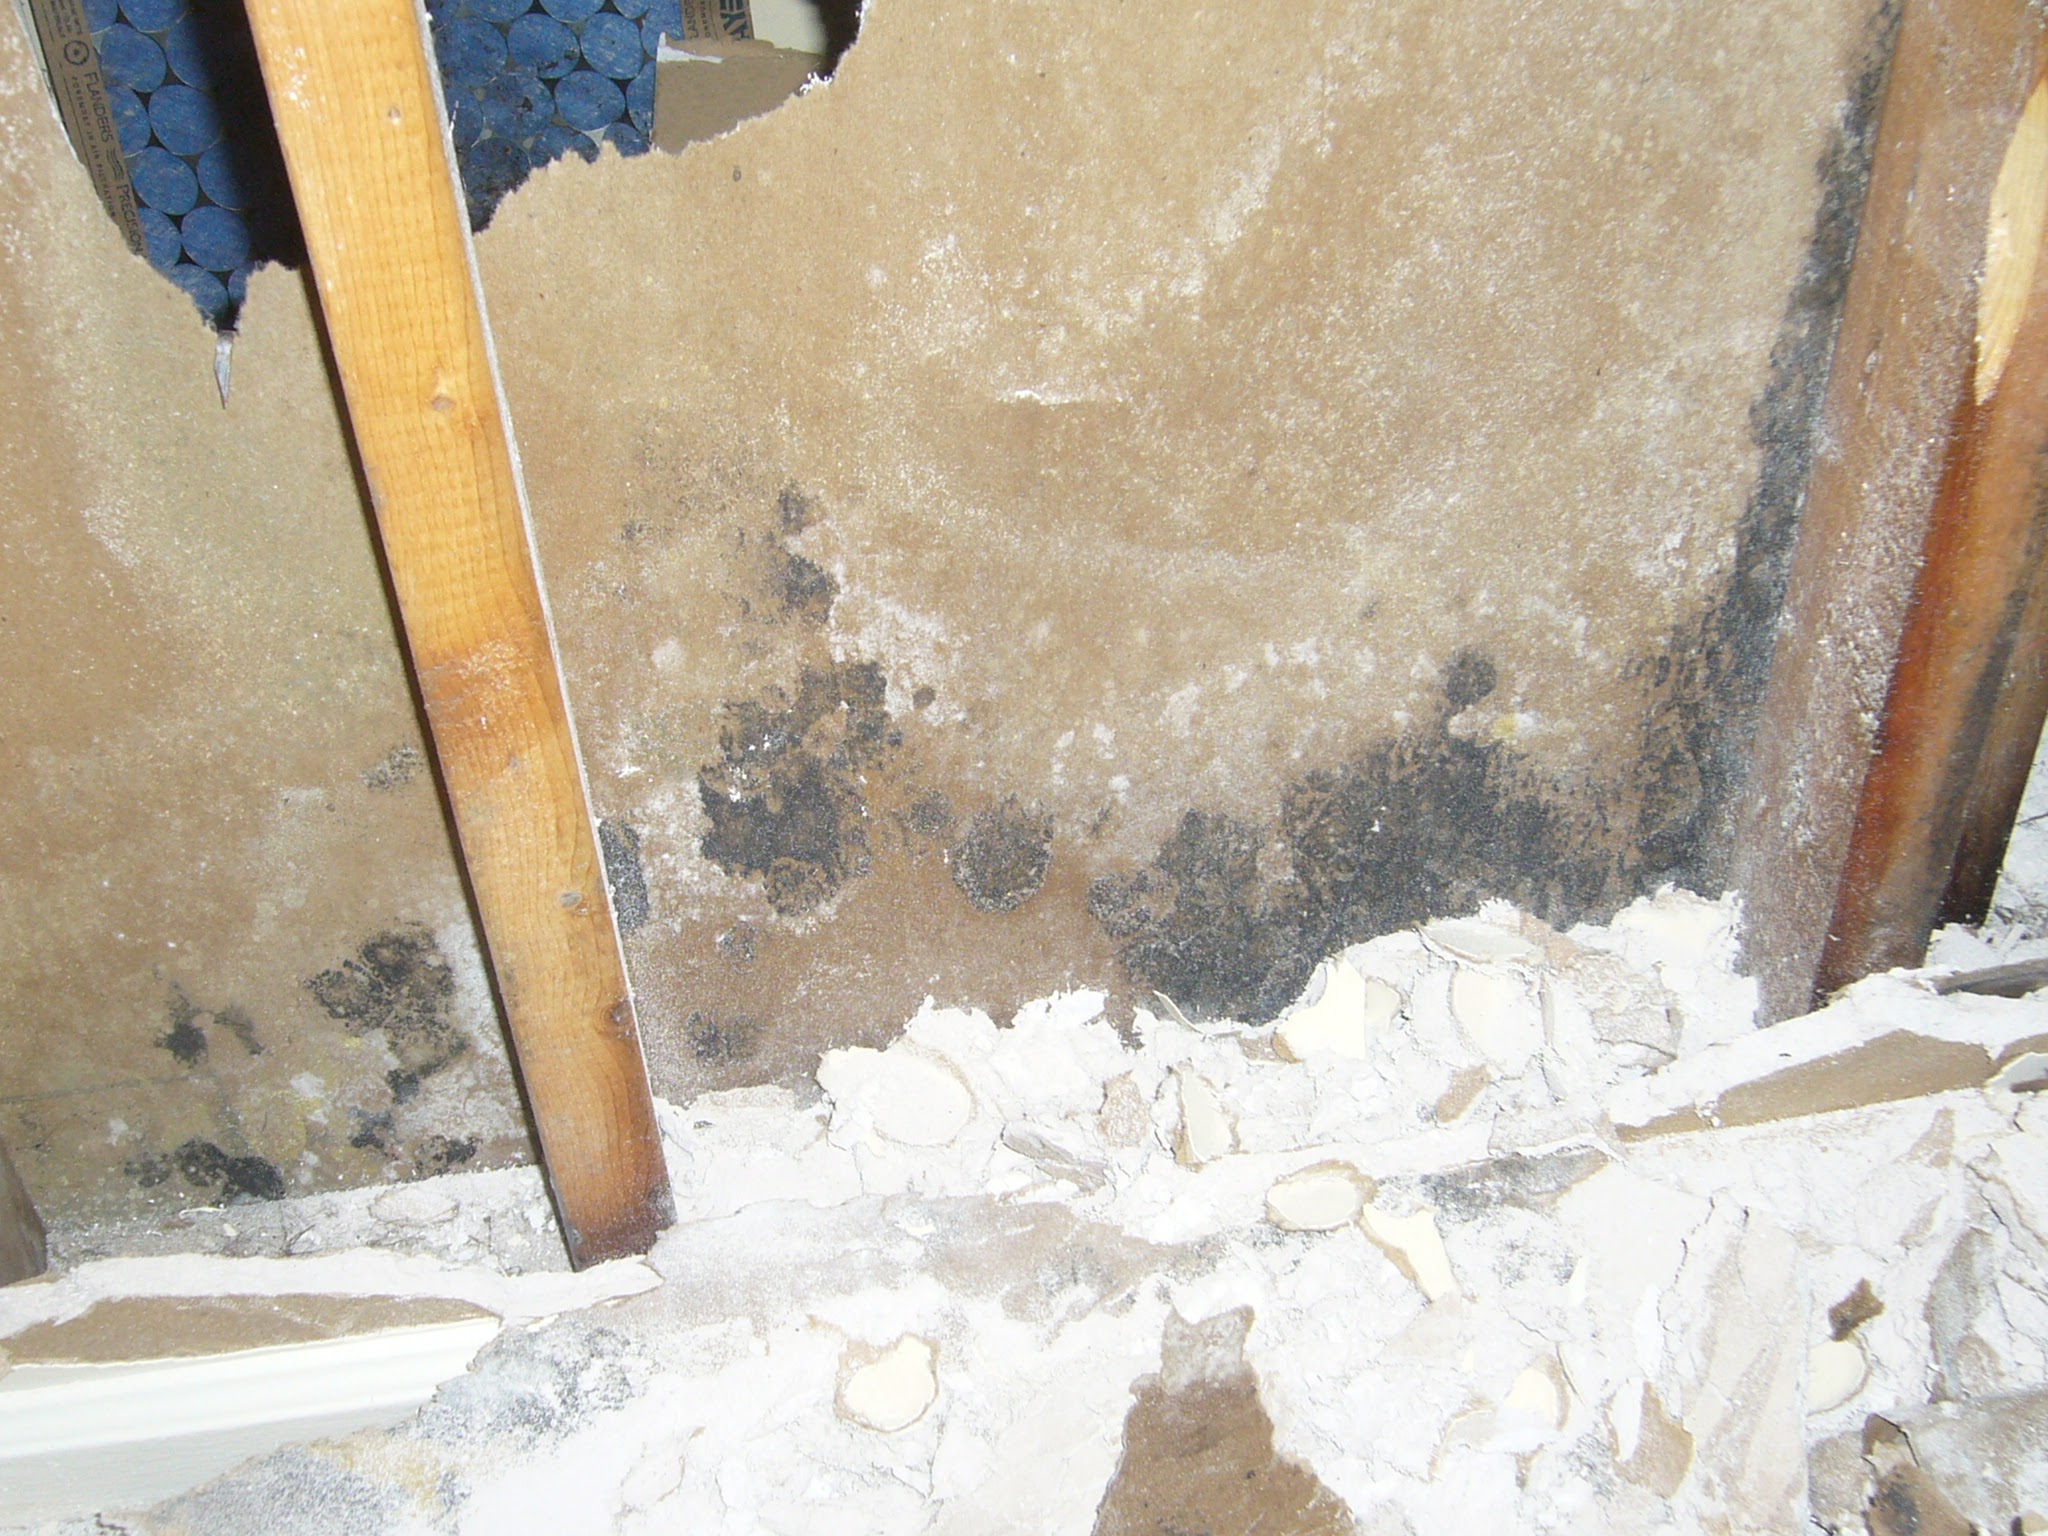 Preventing Water Damage in the Bathroom